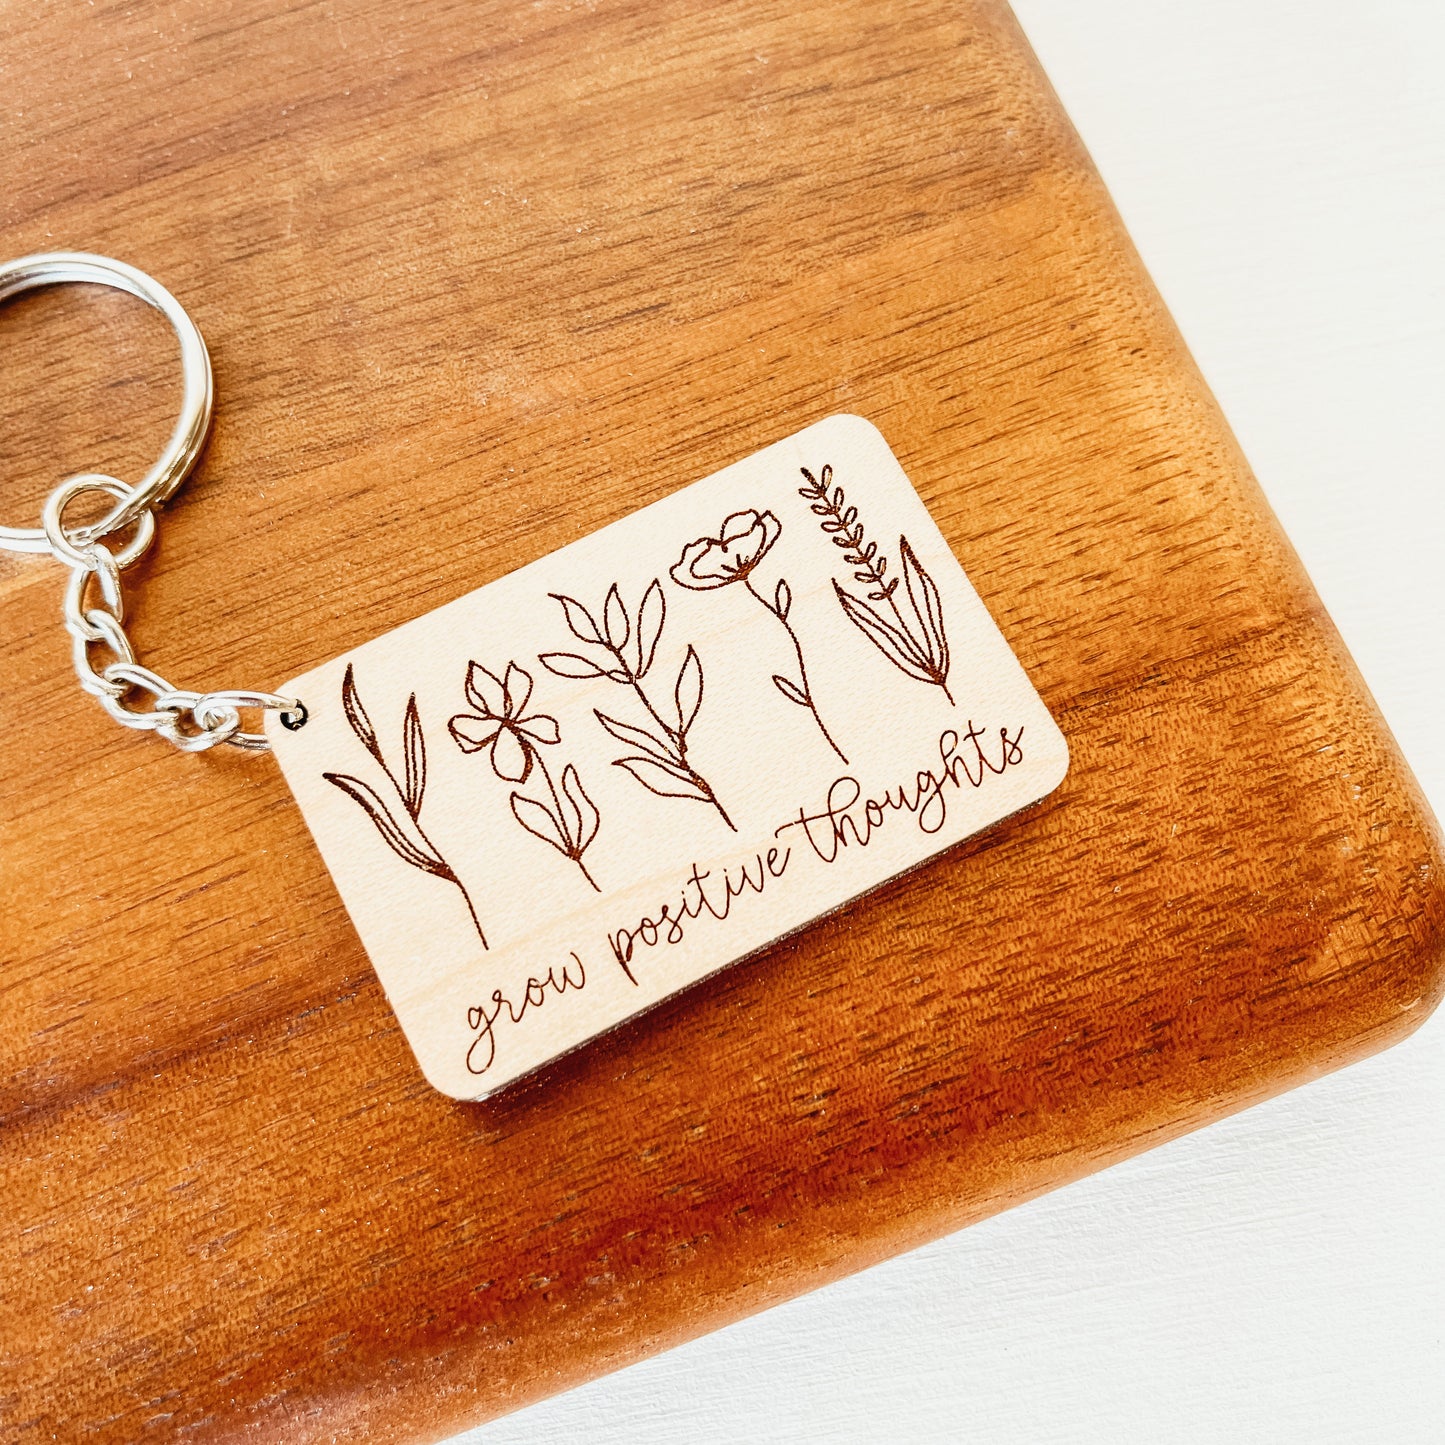 Grow Positive Thoughts Keychain